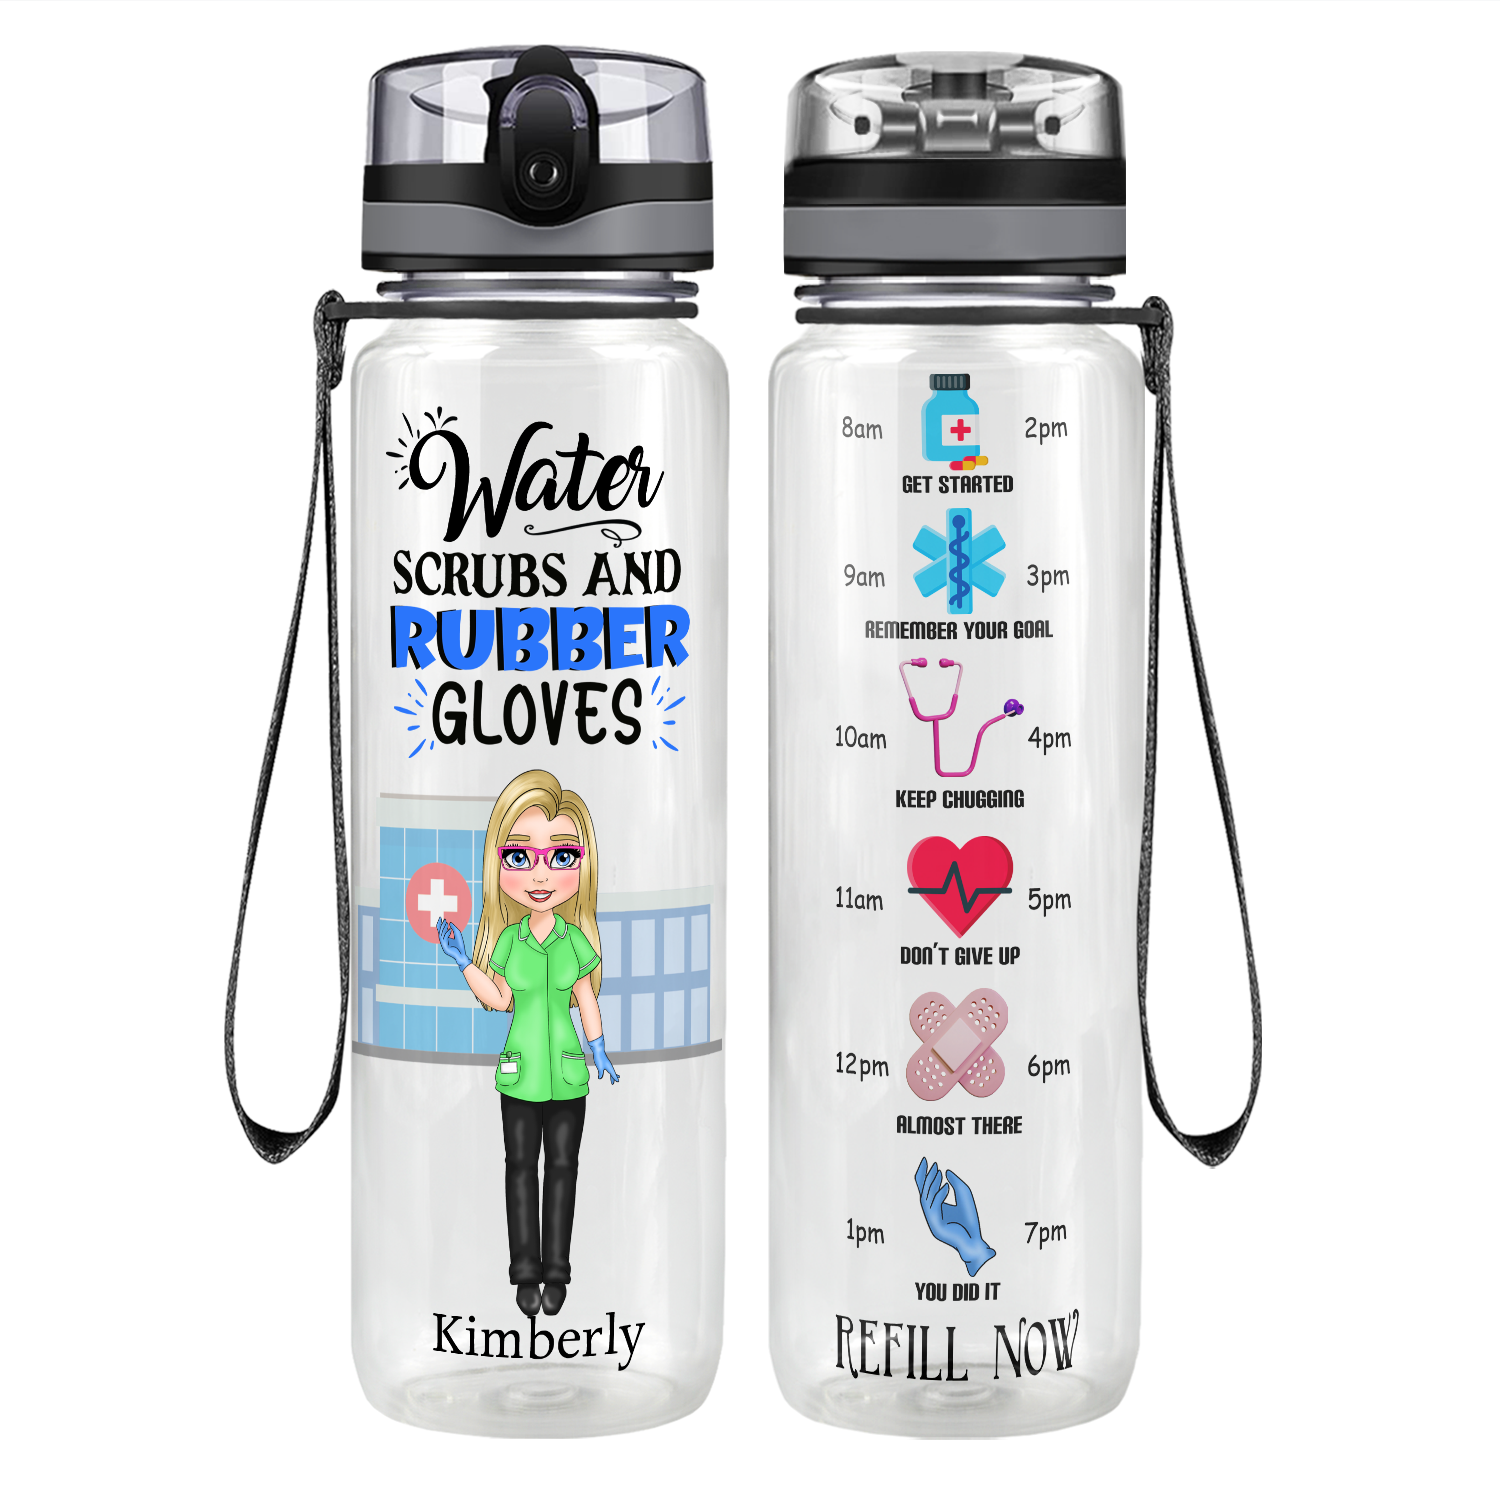 Personalized Water Scrubs and Rubber Gloves on 32 oz Motivational Tracking Water Bottle